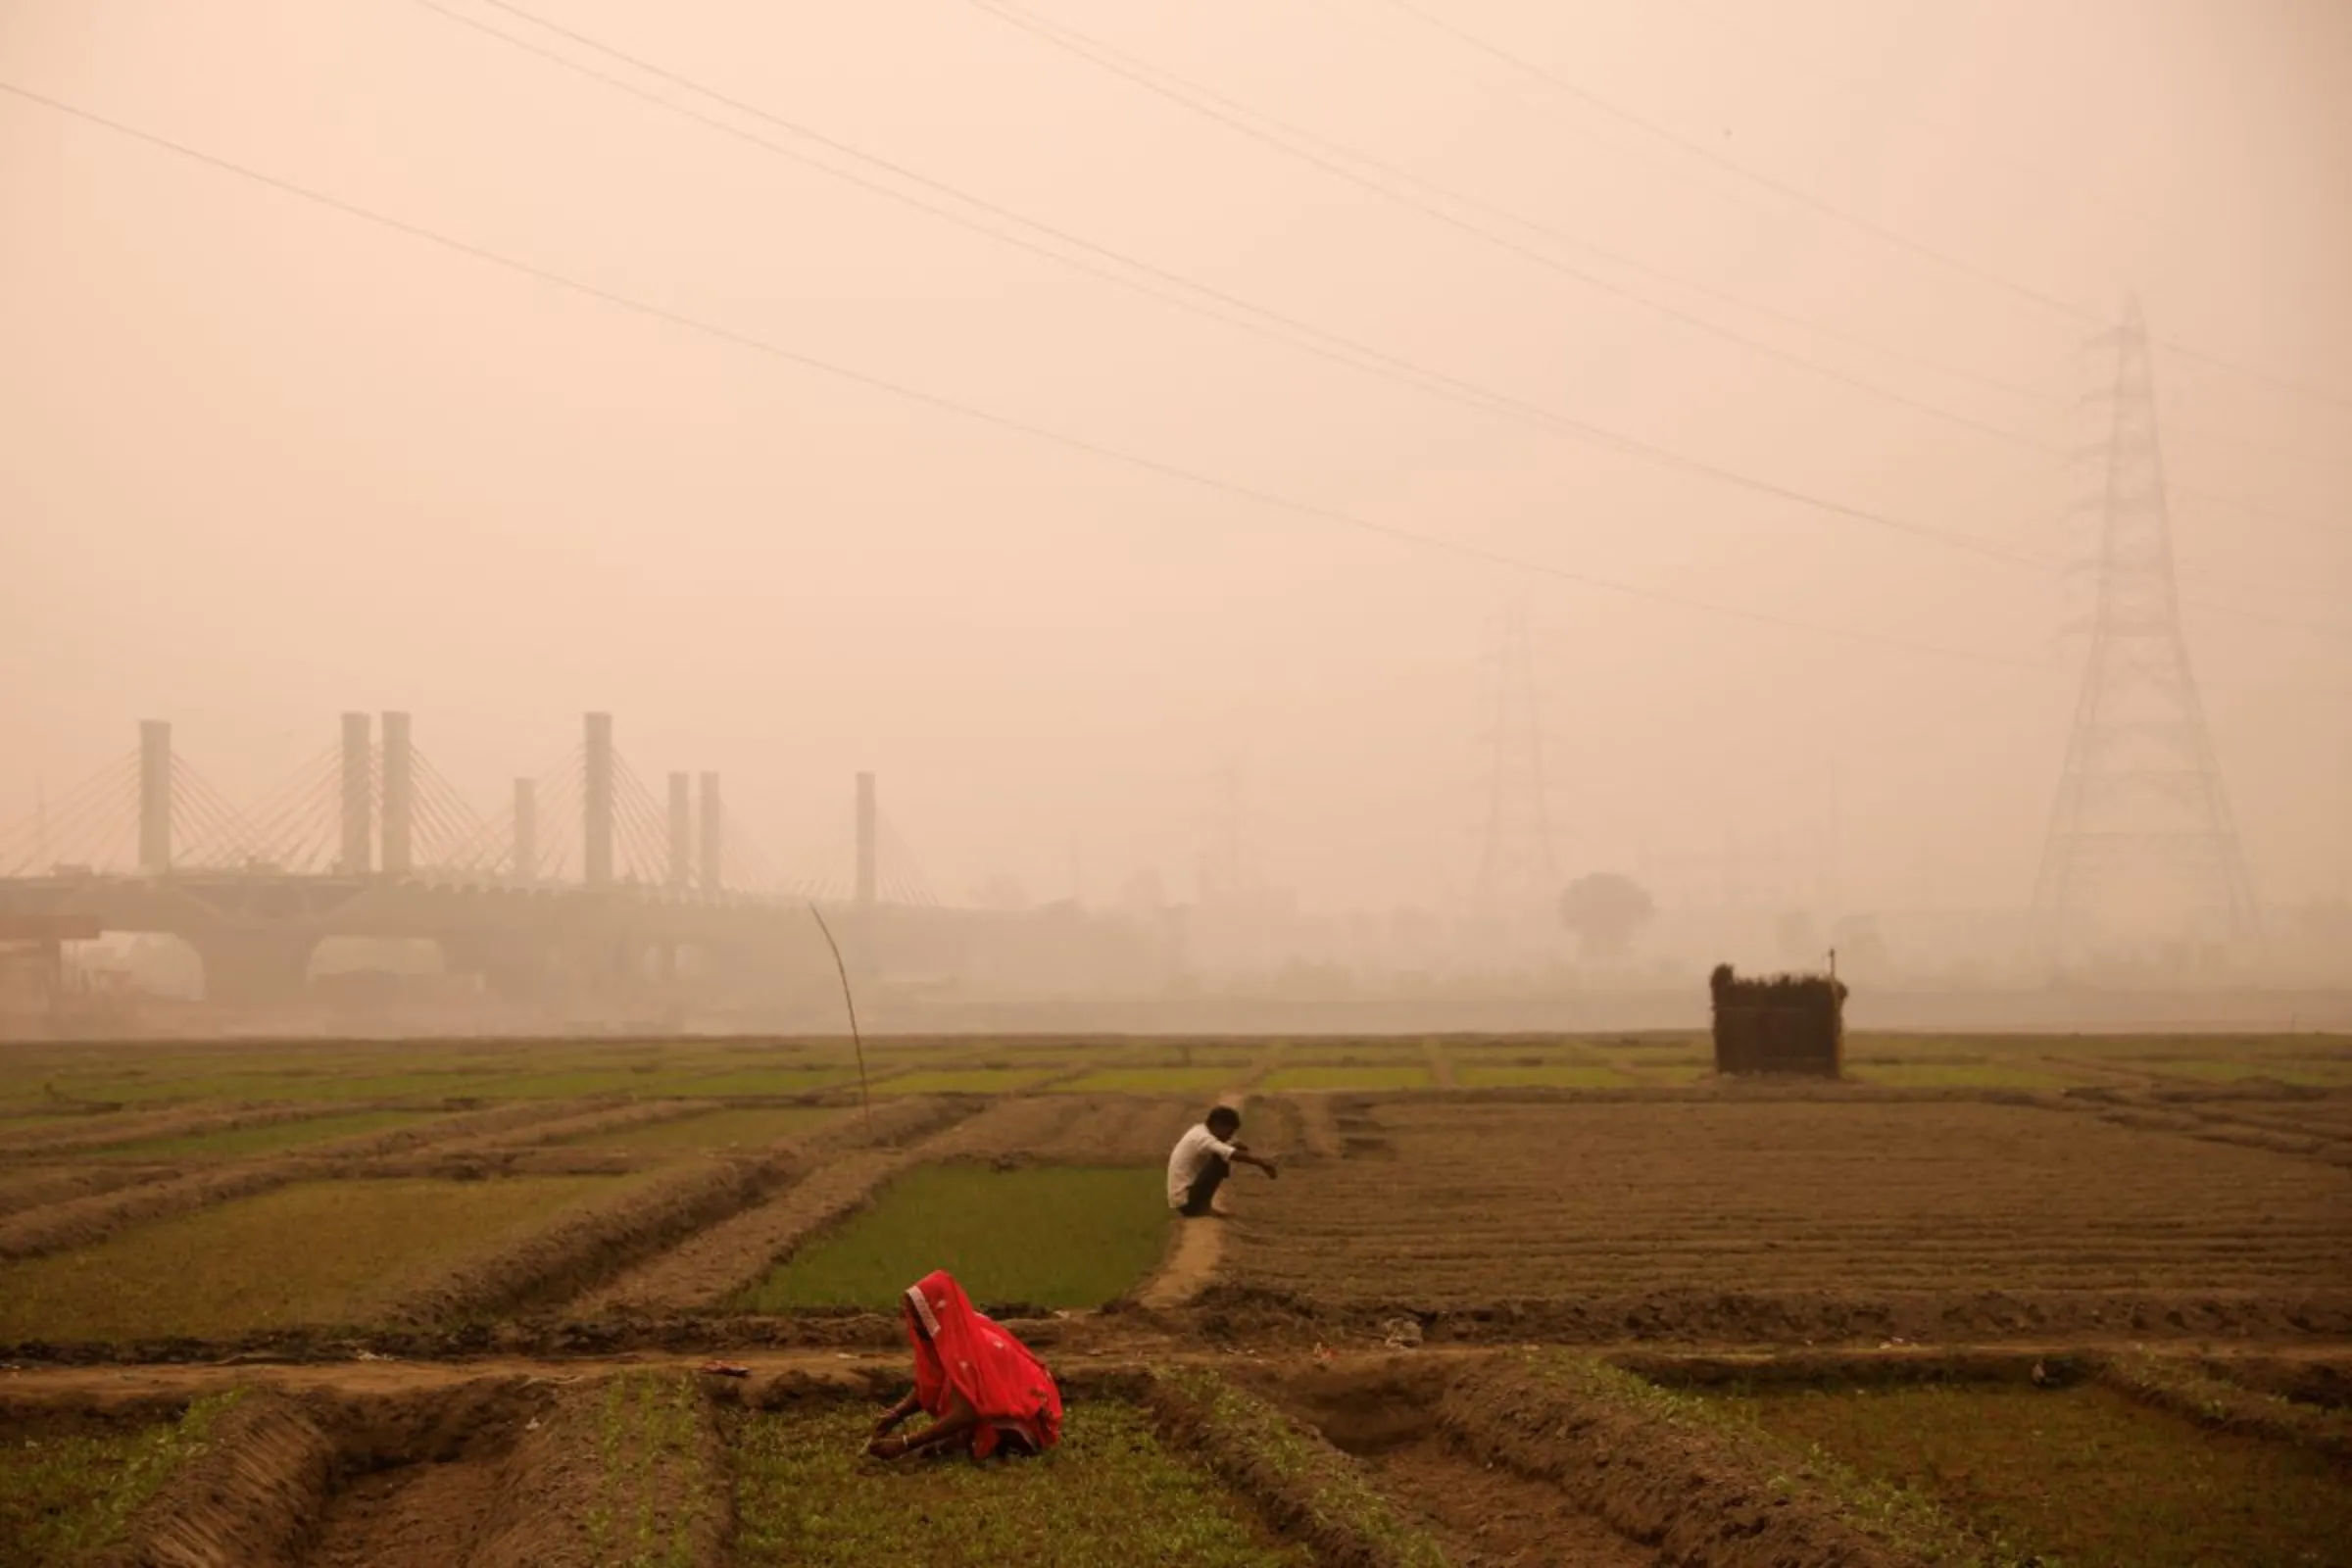 Farmers work amidst smog in a field on the bank of the Yamuna river in New Delhi, India, November 8, 2022.